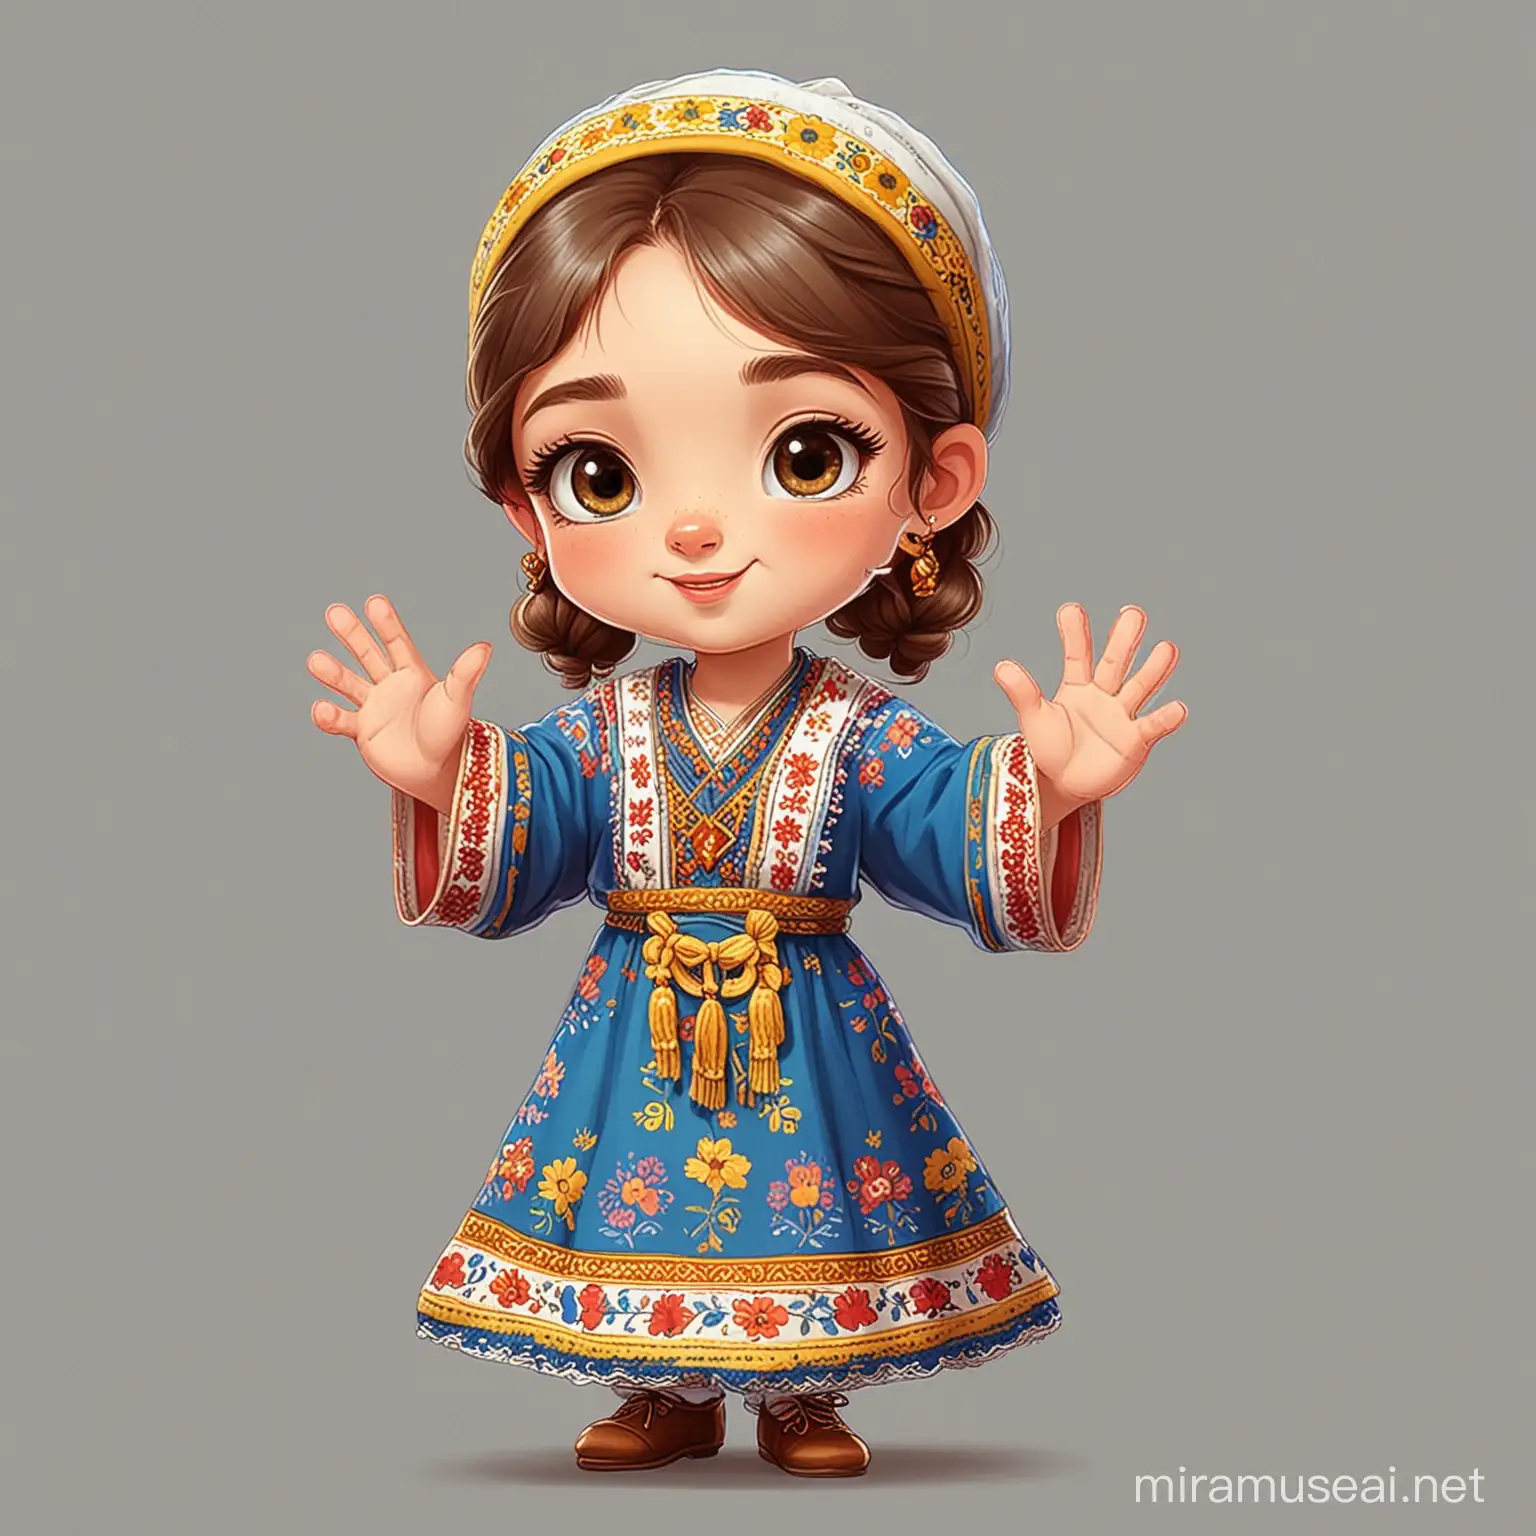 Cute cartoon girl in ukrainian etnick clothes waves his hand to say hello